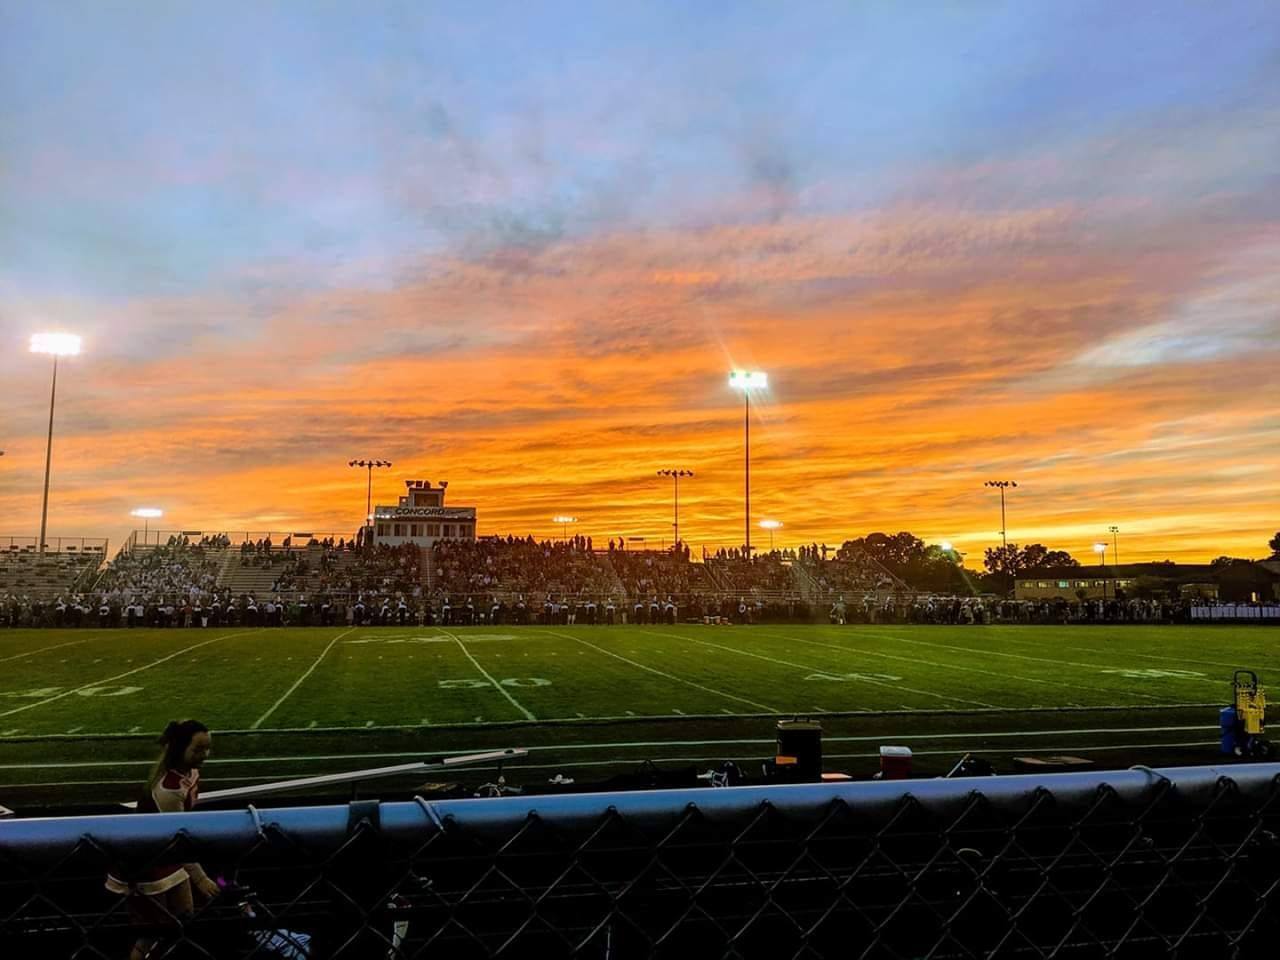 A sunrise over an athletic field